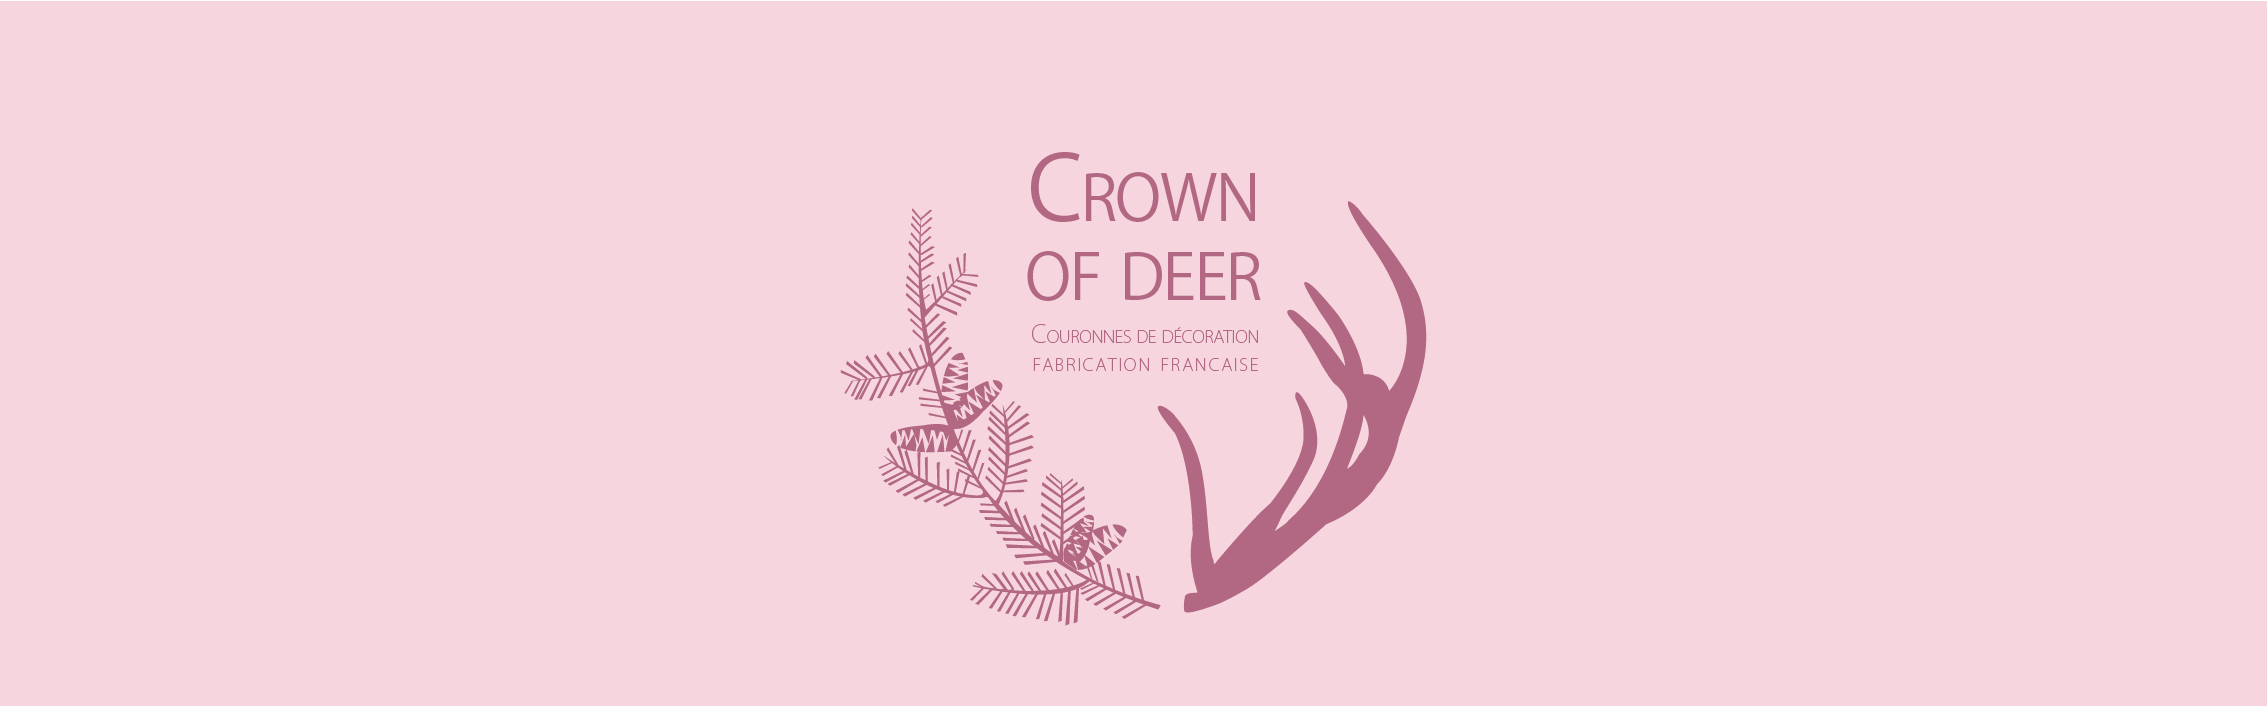 crown-of-deer-decoration-couronne-francaise-mariage